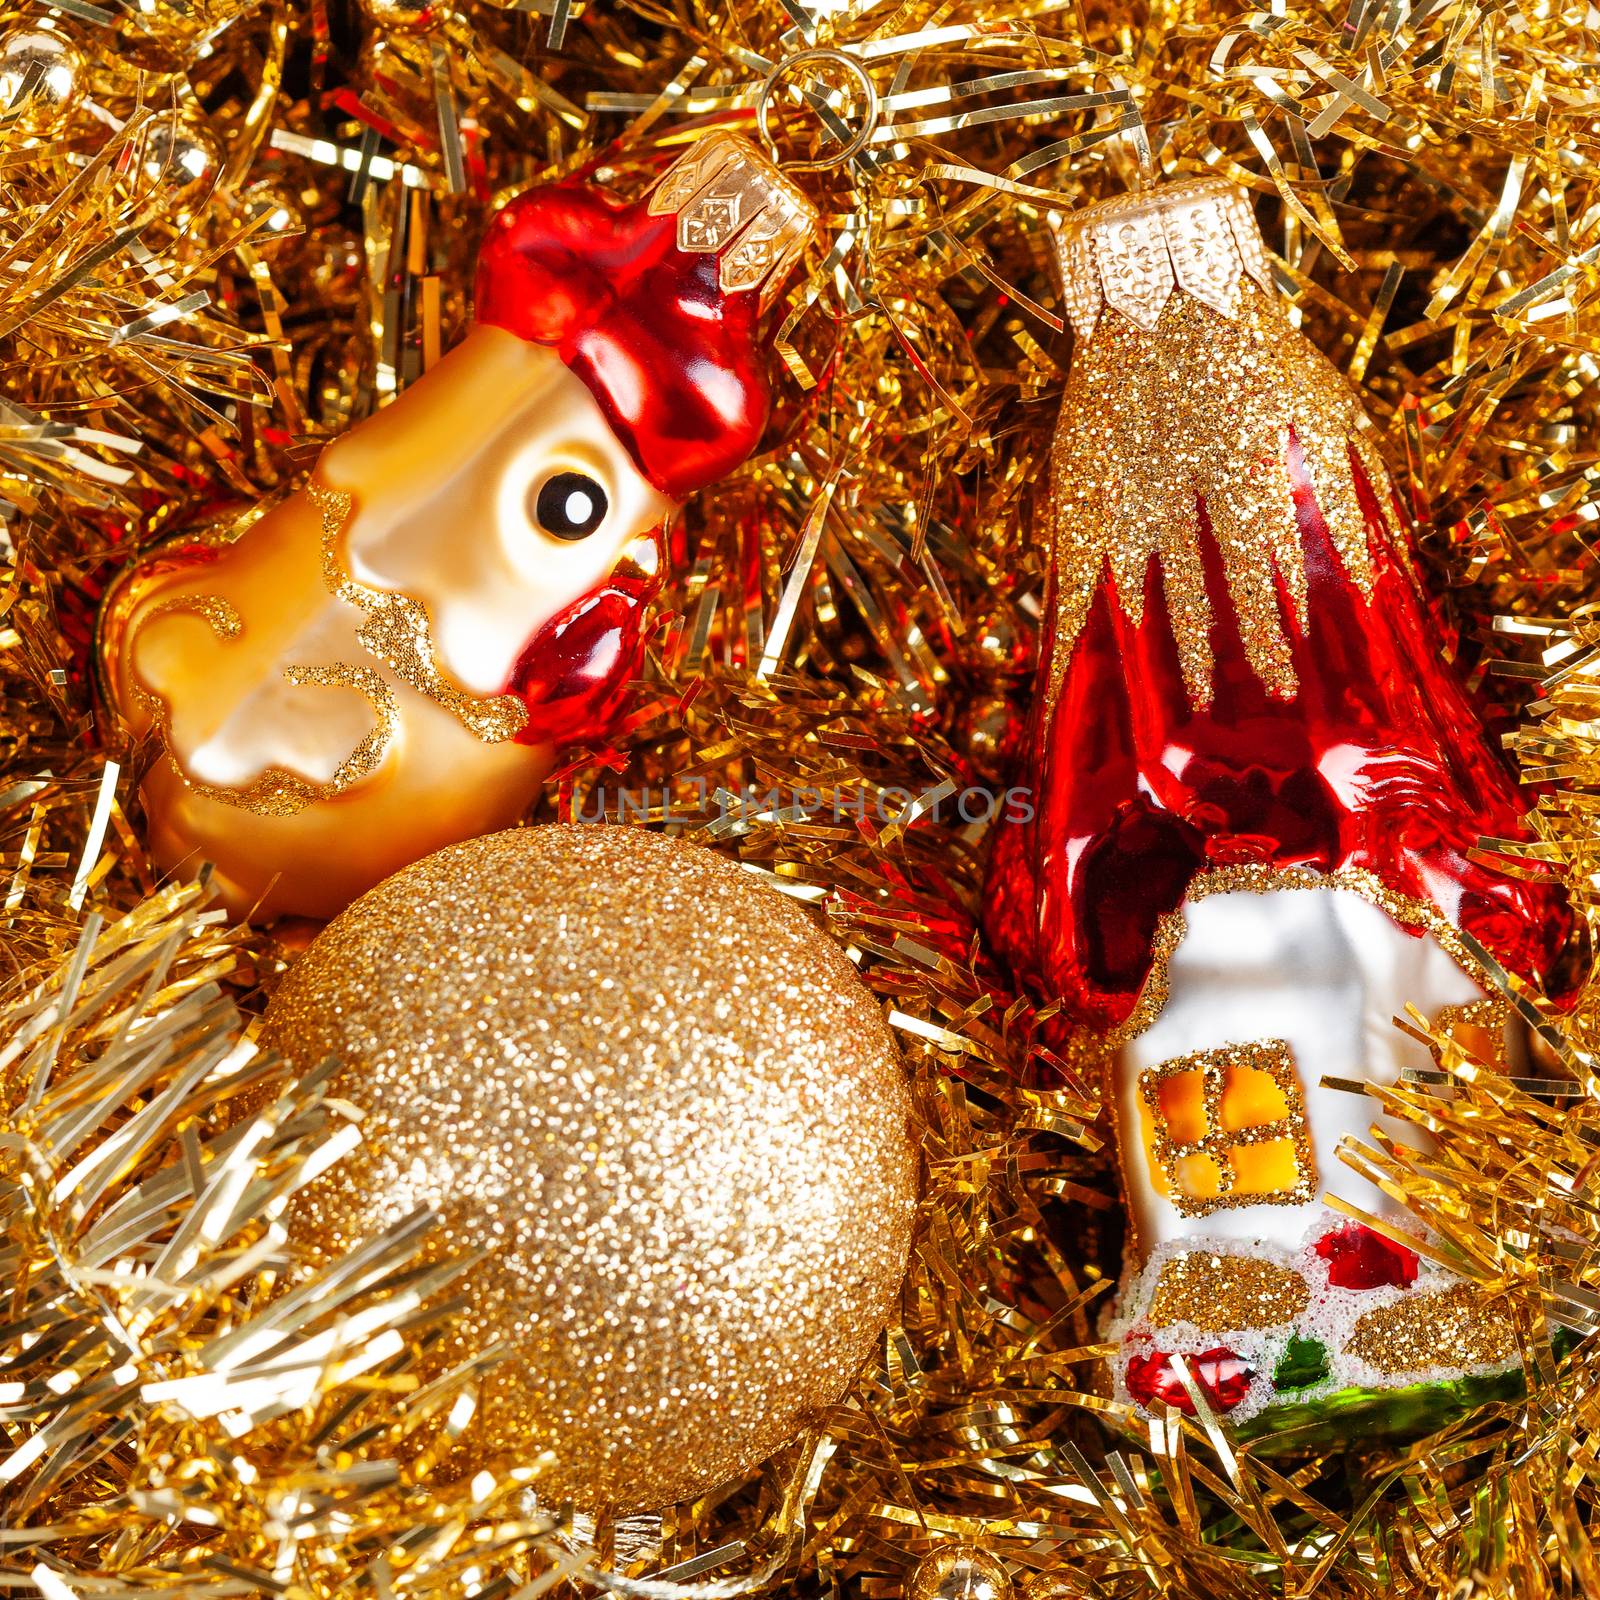 Golden glass rooster, toy house and ball in box with tinsel. Christmas and New Year decorations.